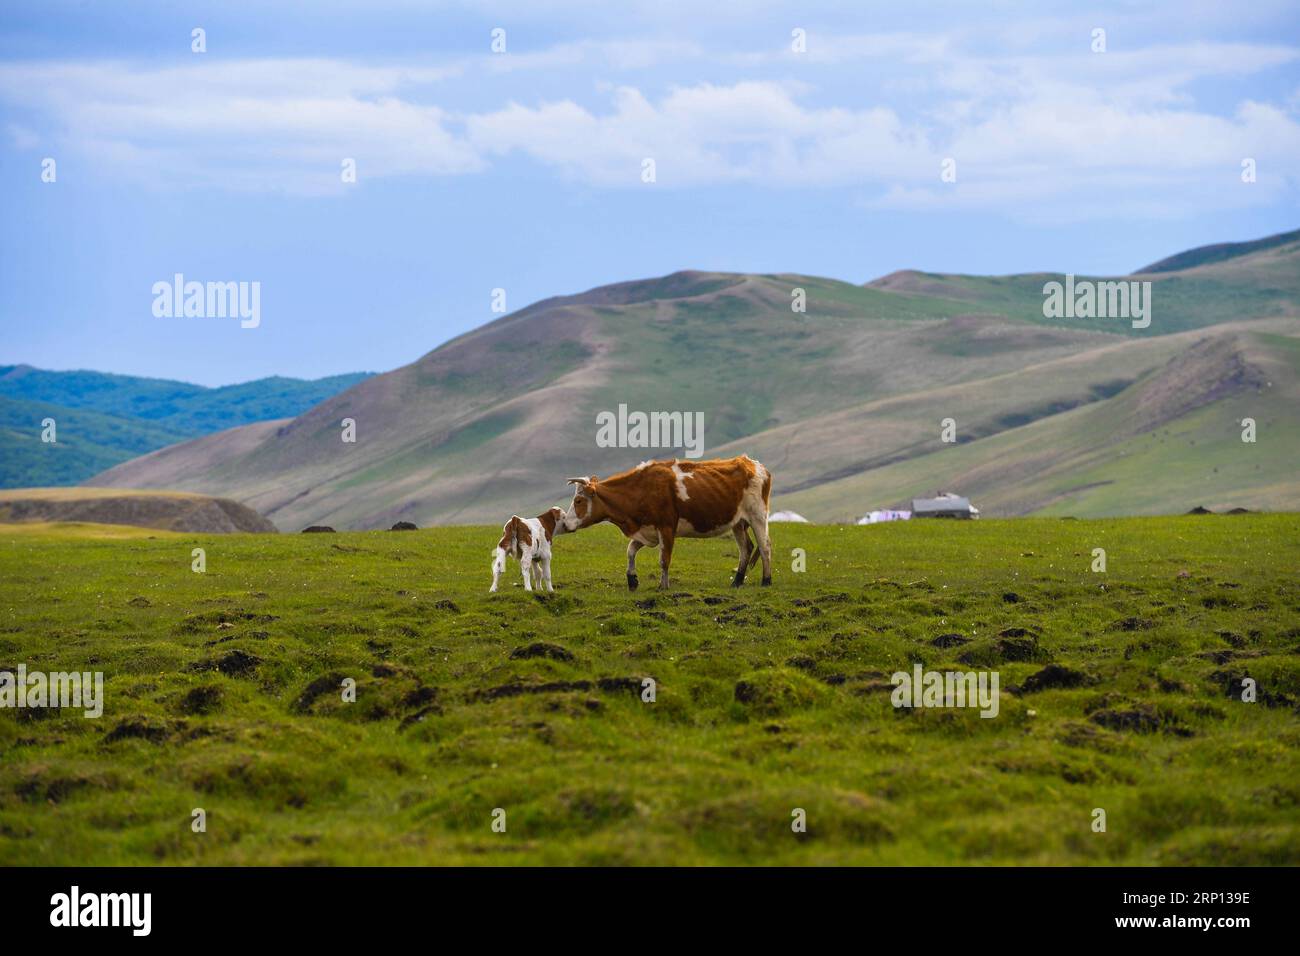 (180607) -- CHIFENG, June 7, 2018 -- Livestock graze on a grassland of Ar Horqin Banner in Chifeng, north China s Inner Mongolia Autonomous Region, June 6, 2018. Grass on the pastures of Inner Mongolia resumes growth thanks to rising temperature and more rainfall.) (wyl) CHINA-INNER MONGOLIA-CHIFENG-GRASSLAND (CN) PengxYuan PUBLICATIONxNOTxINxCHN Stock Photo